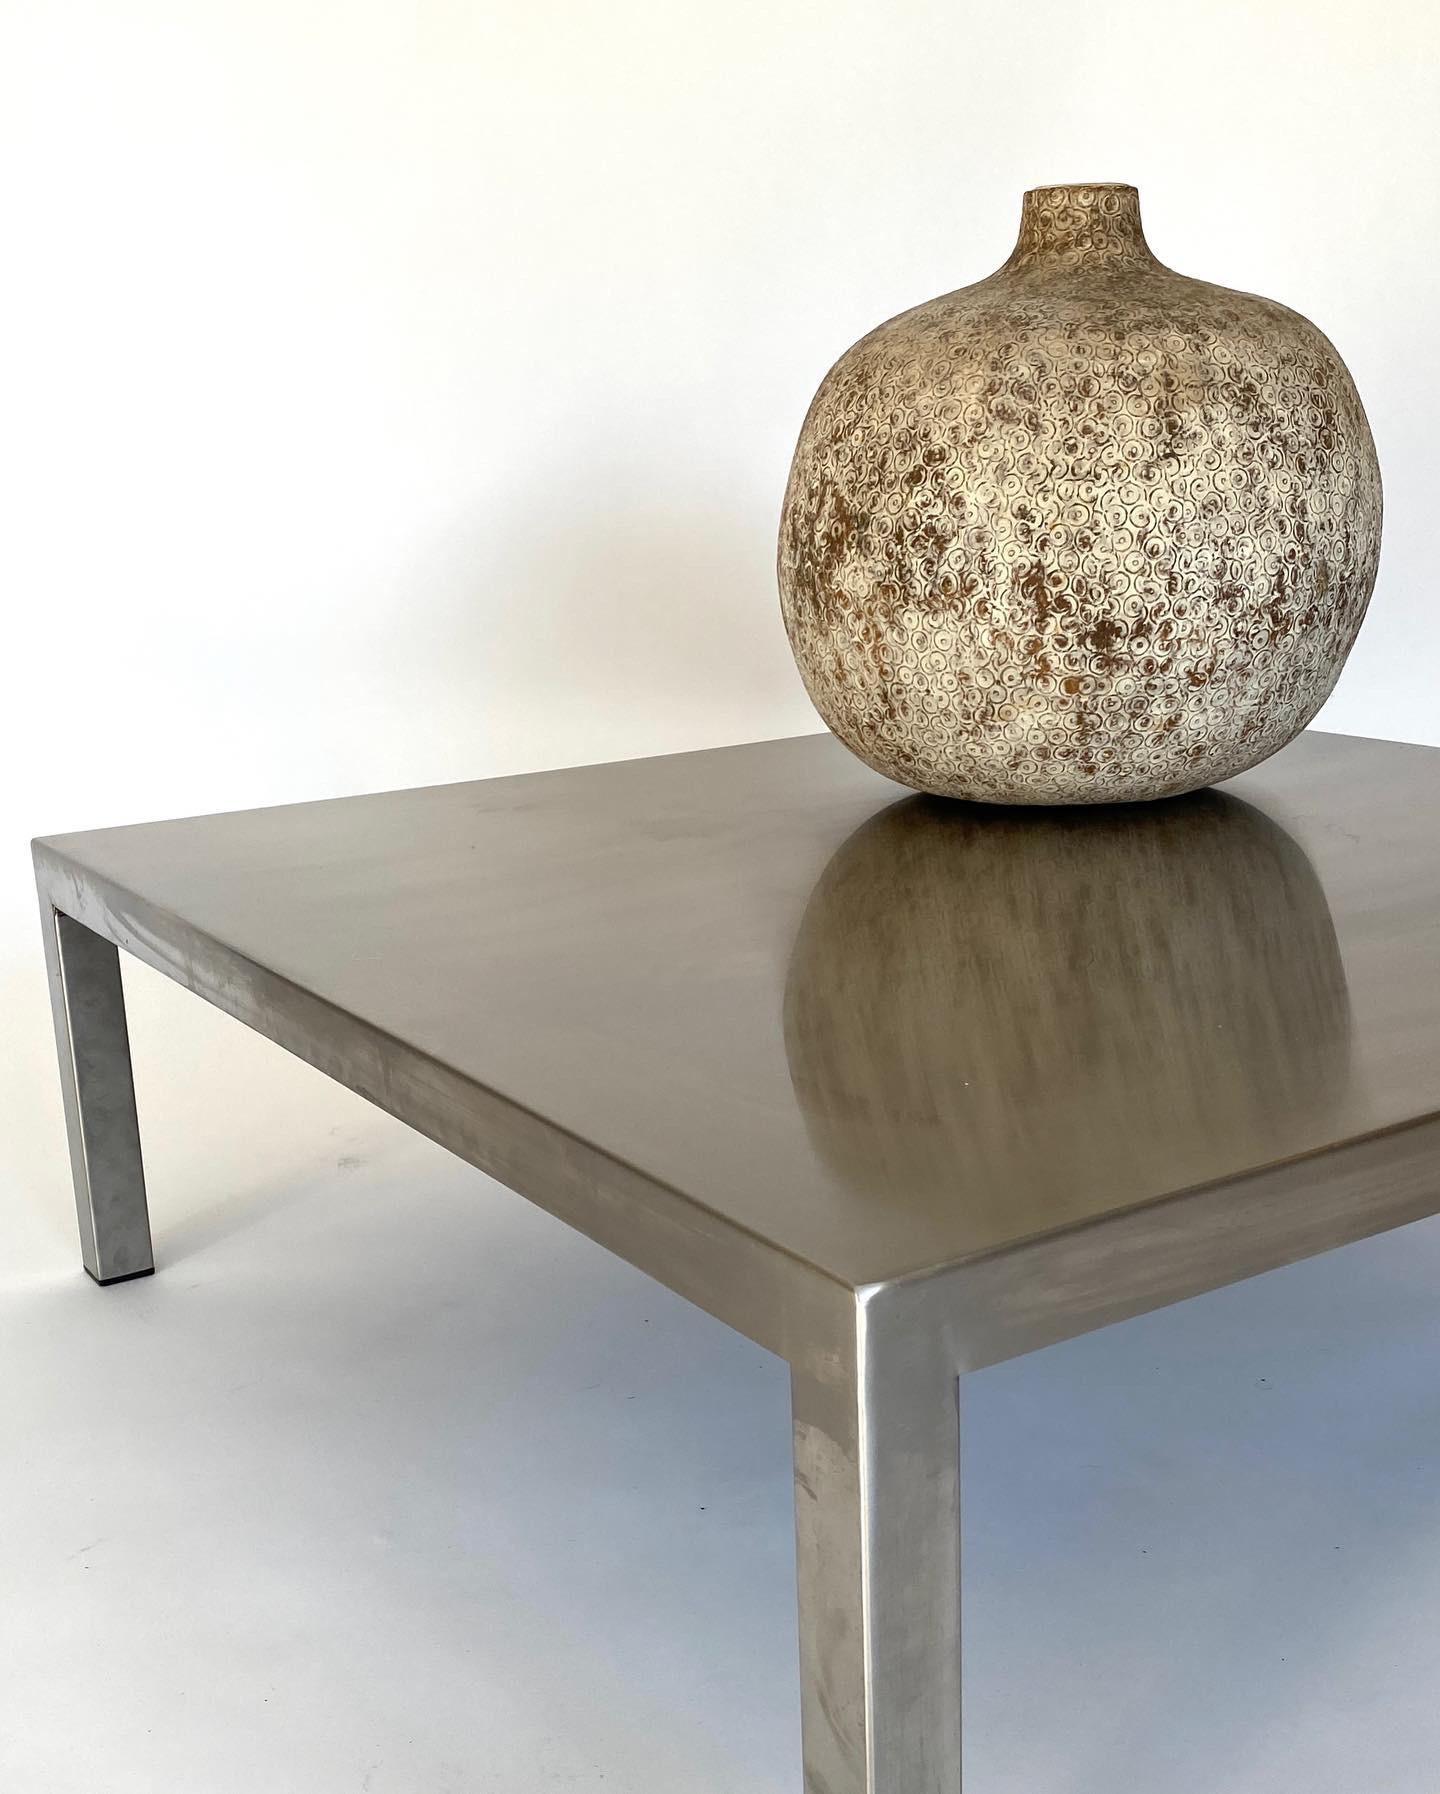 Maria Pergay Square French Stainless Steel Coffee Table, circa 1970 For Sale 5